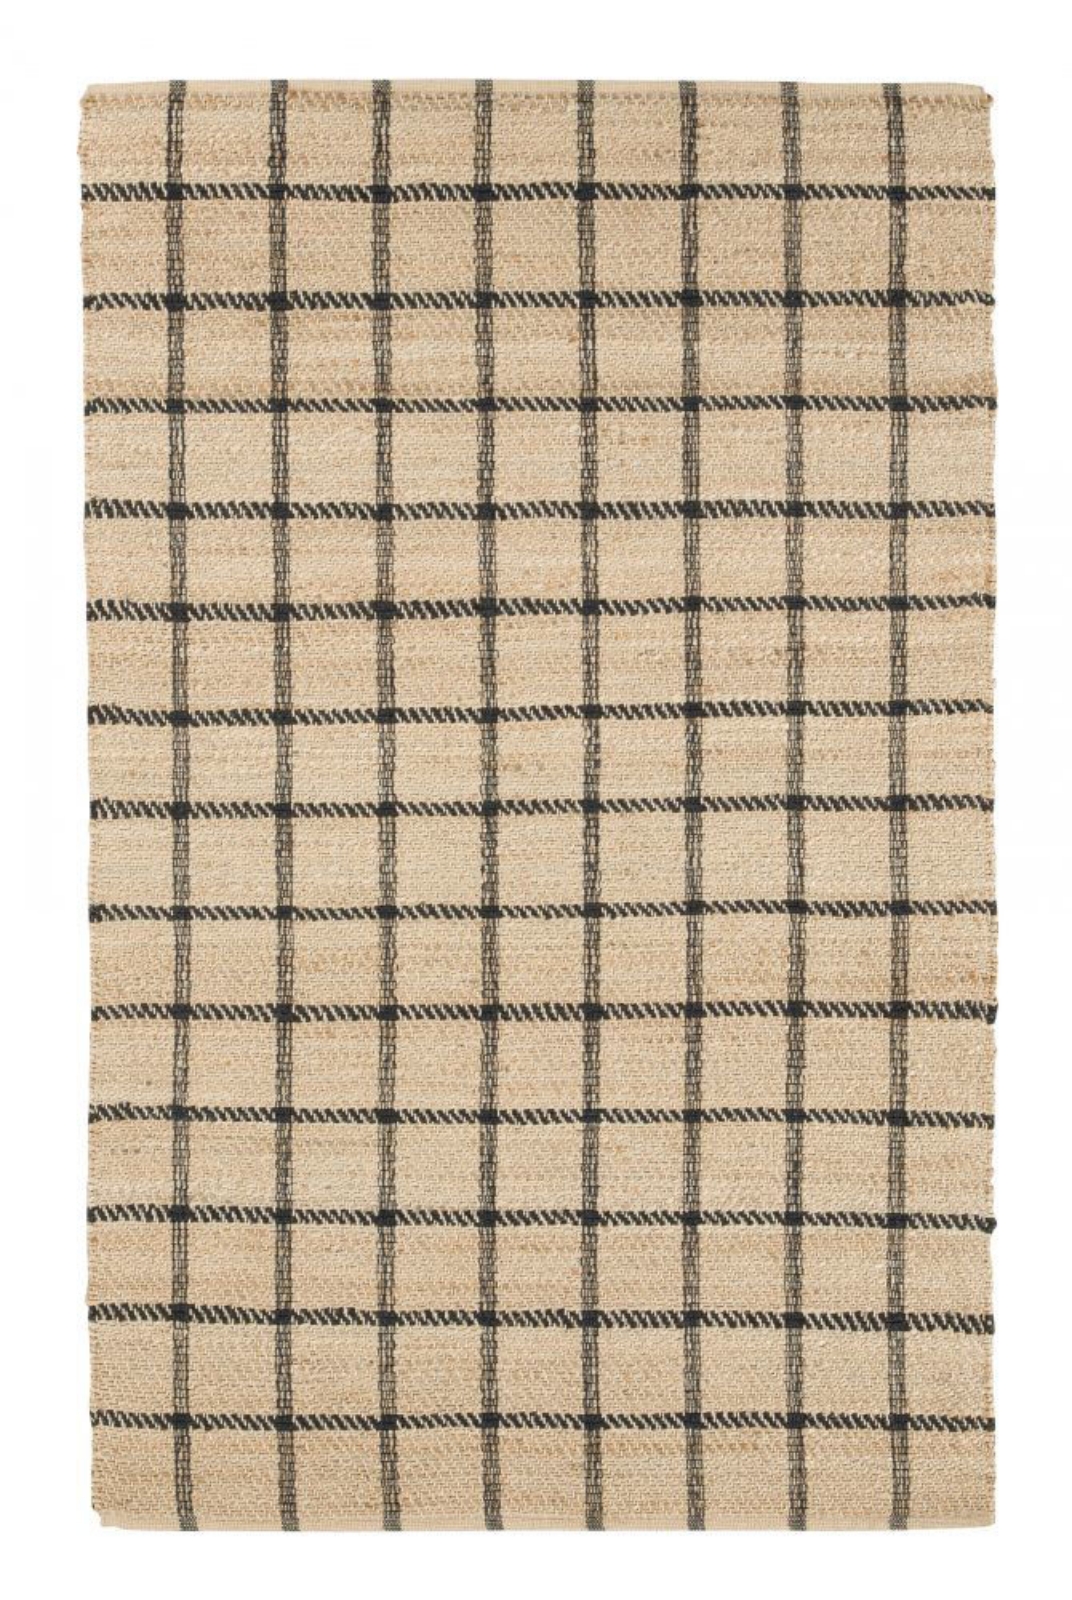 Picture of Agoura Hills Large Rug